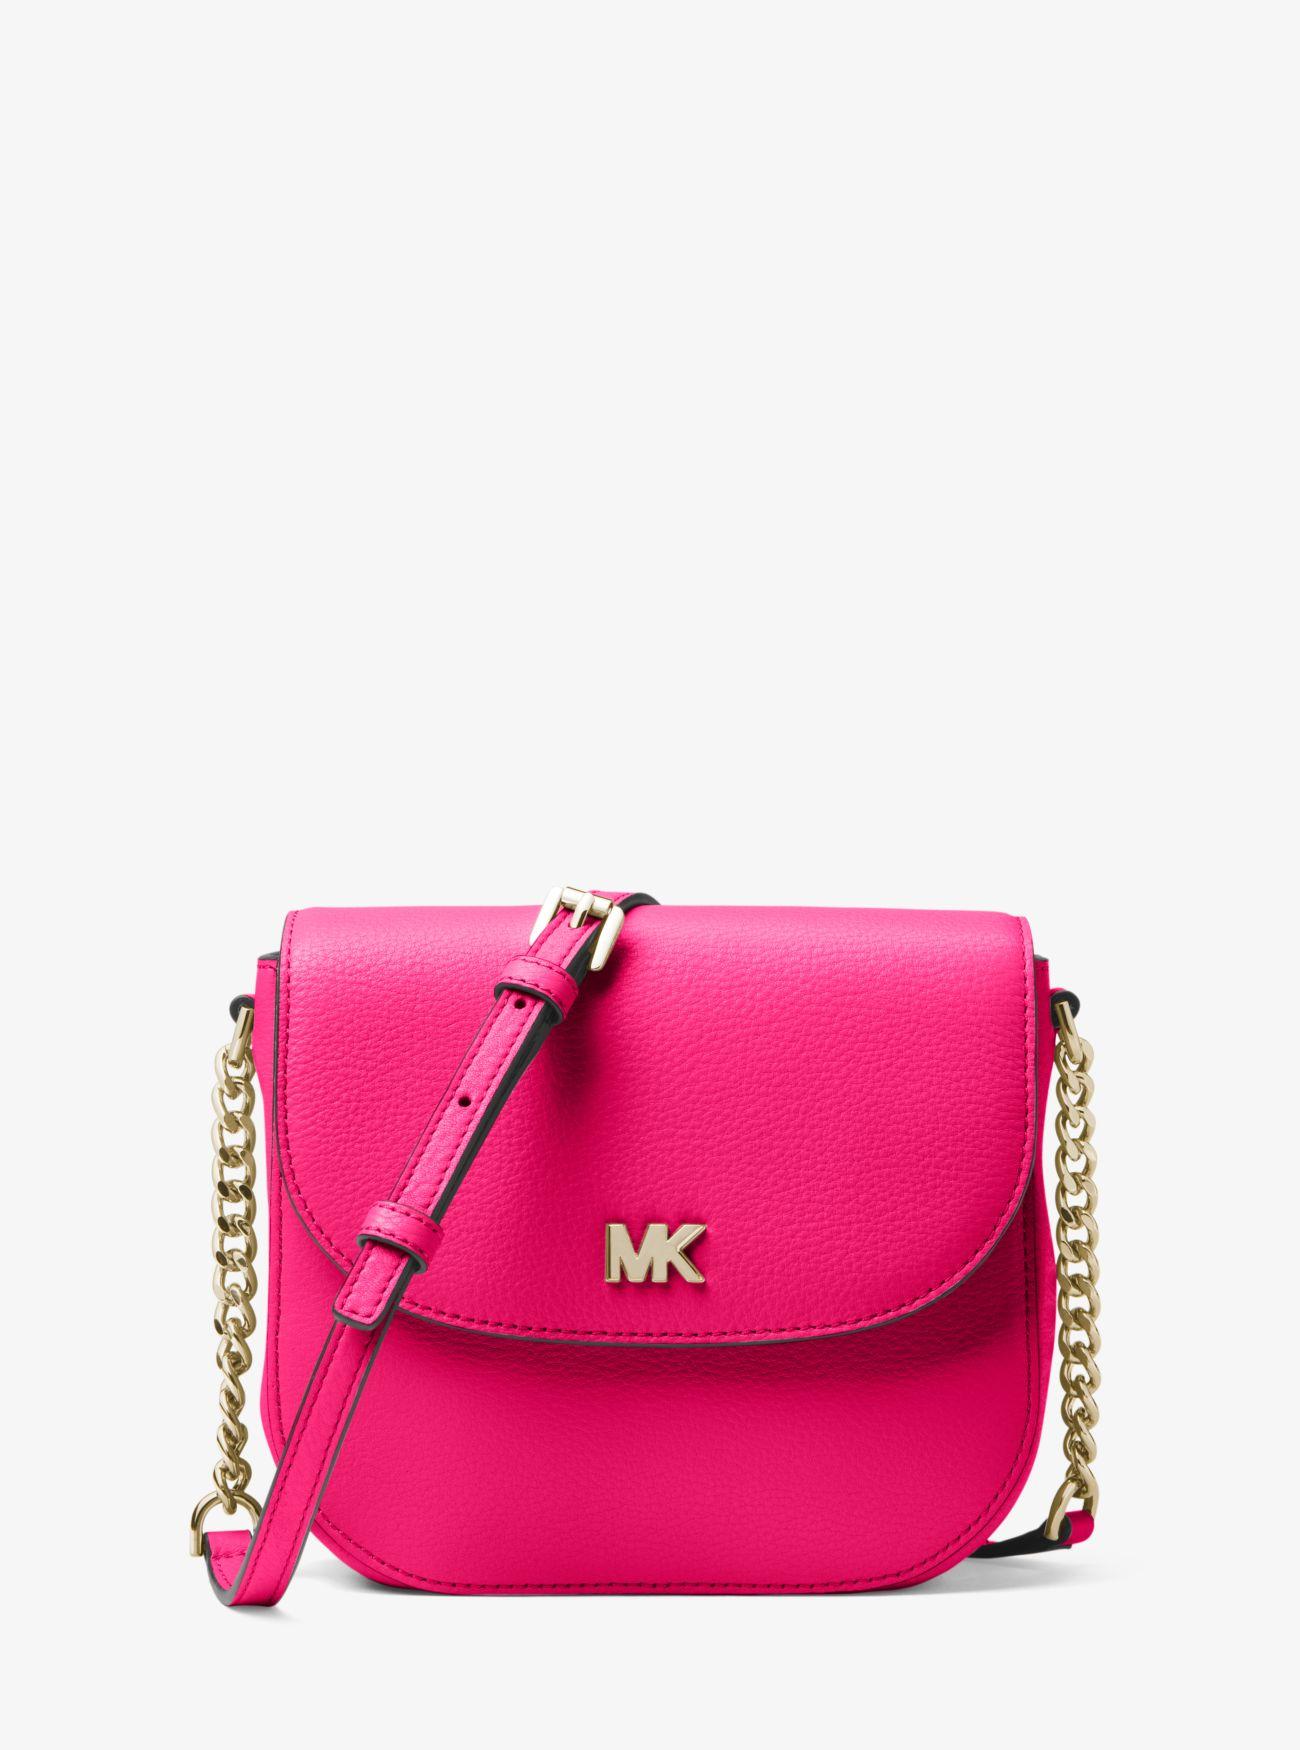 Michael Kors Mott Pebbled Leather Dome Crossbody Bag in Ultra Pink (Pink) - Lyst